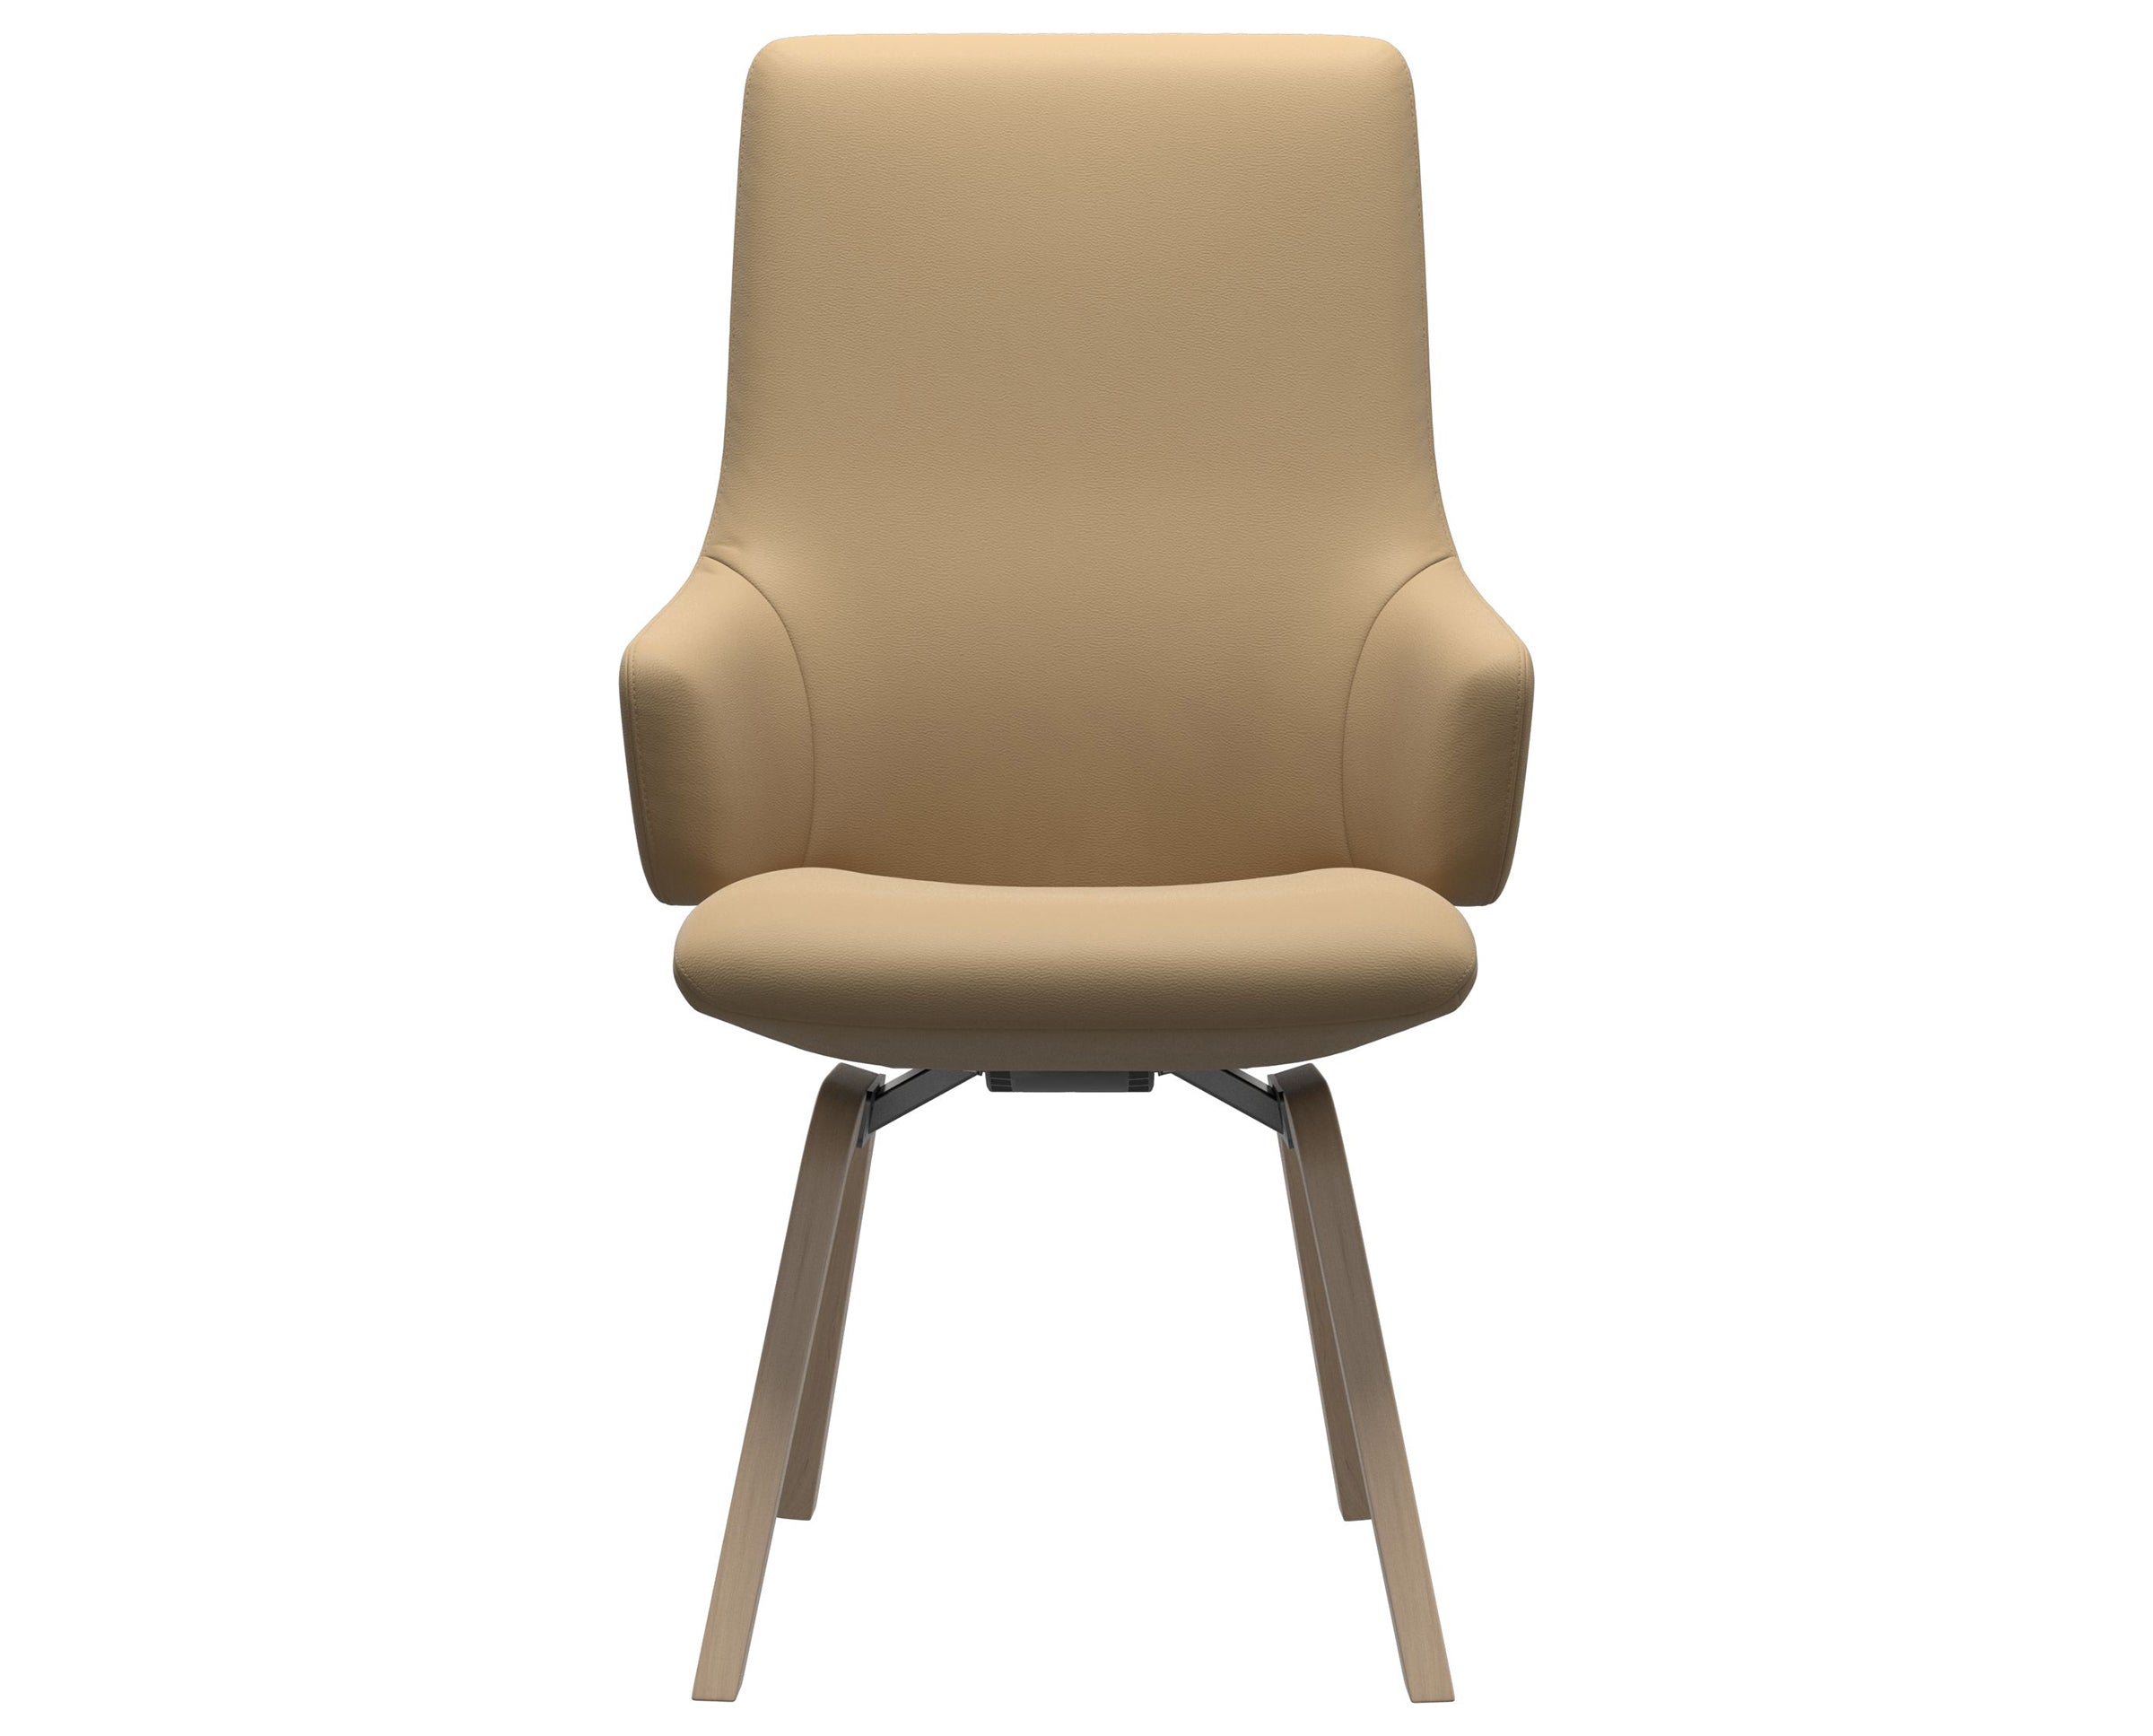 Paloma Leather Sand and Natural Base | Stressless Laurel High Back D200 Dining Chair w/Arms | Valley Ridge Furniture